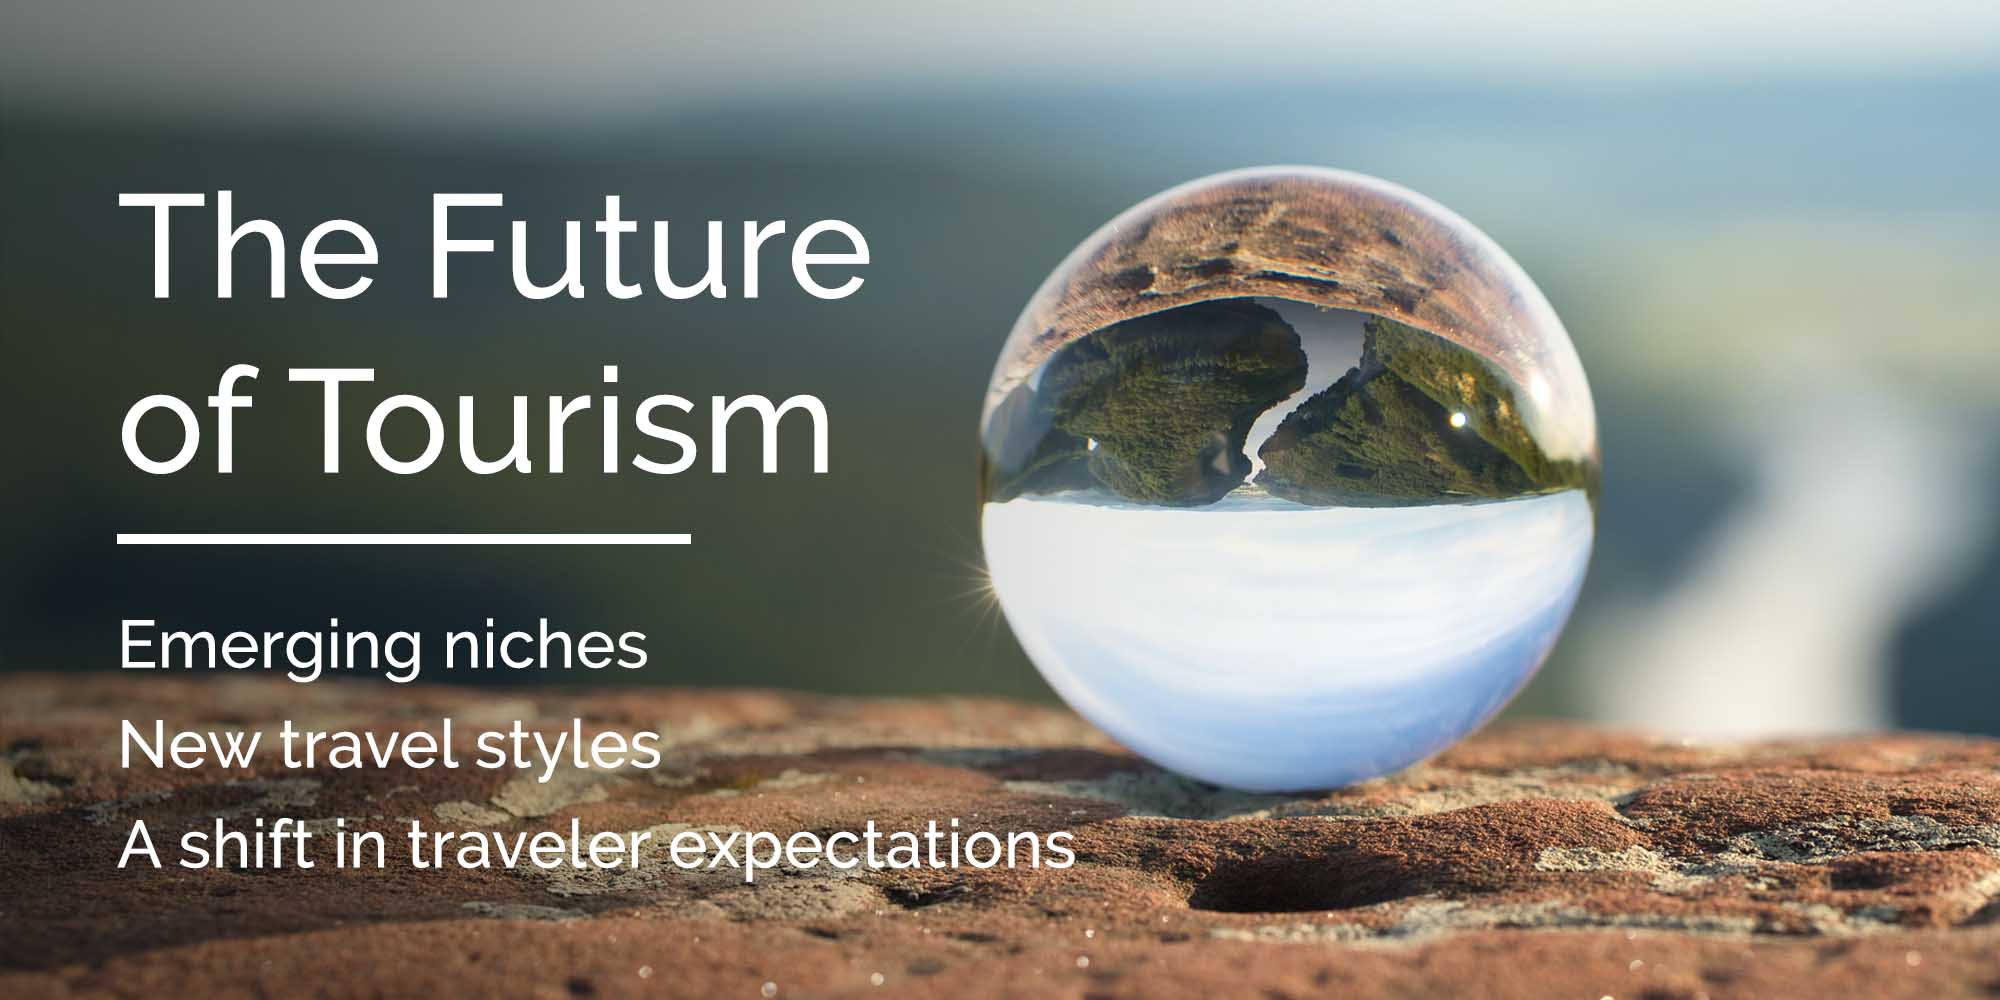 The future of tourism: travel trends for 2021 and beyond